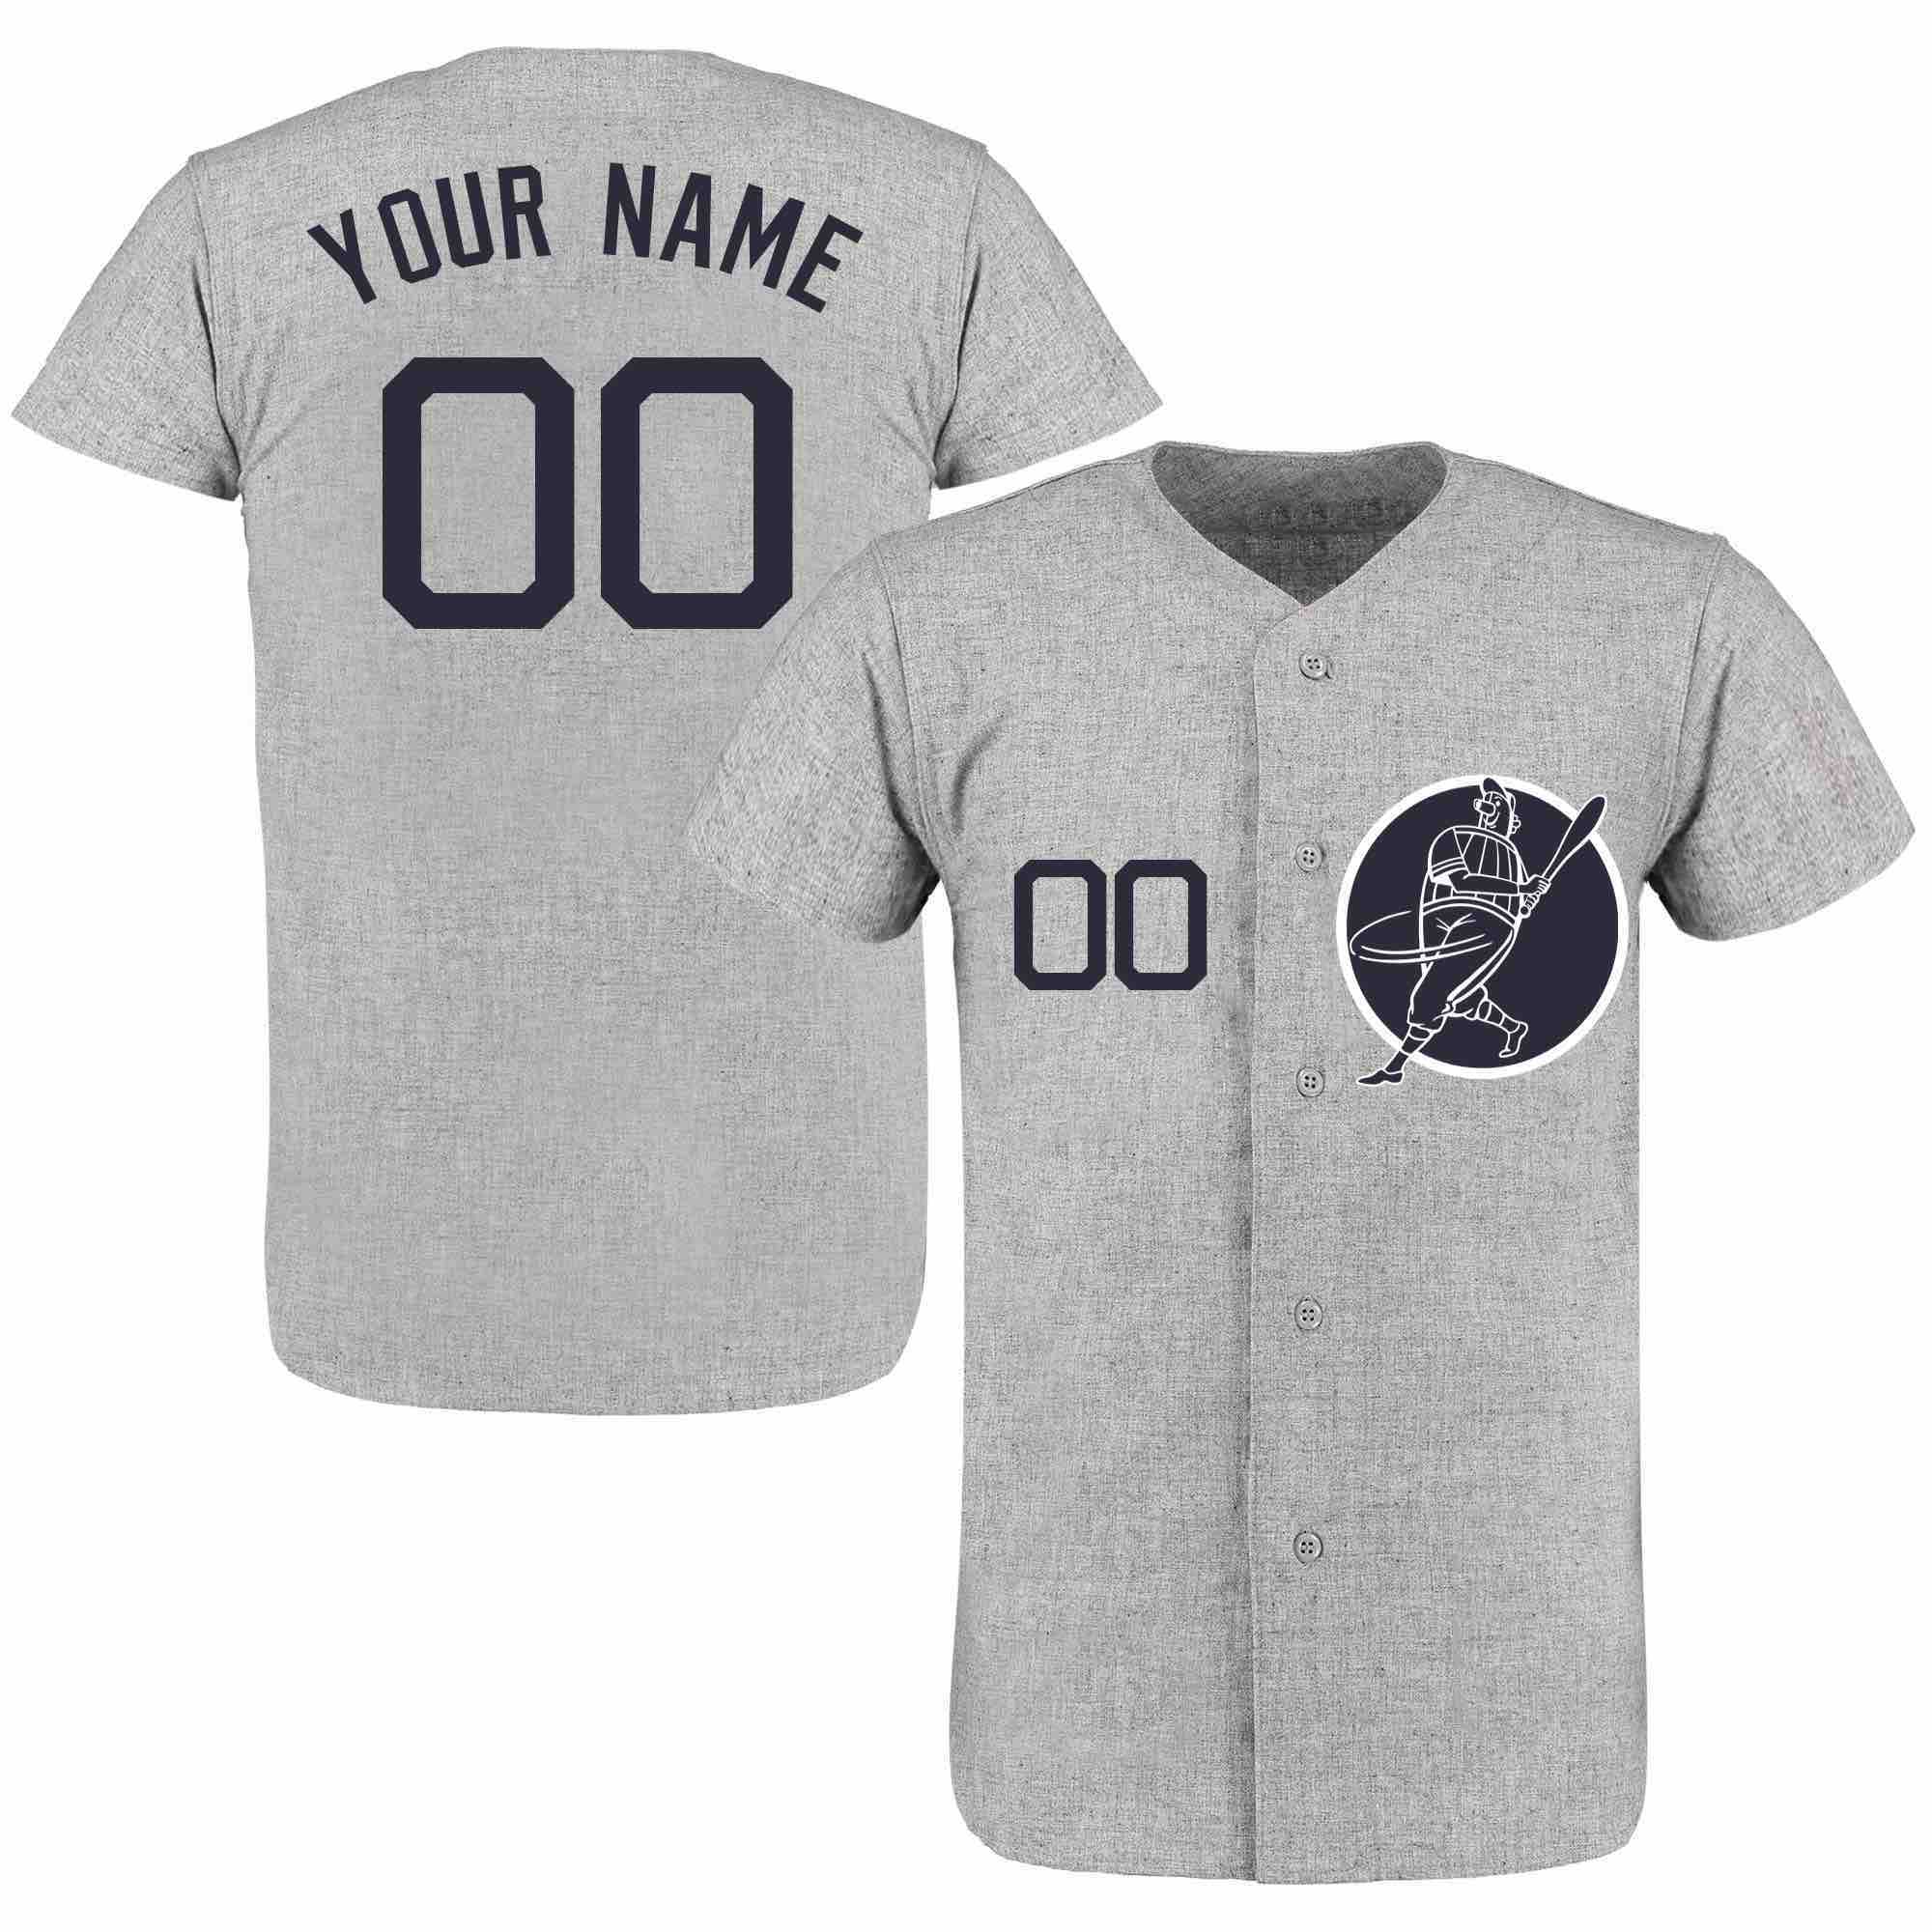 MLB New York Yankees Personalized Grey Color Jersey